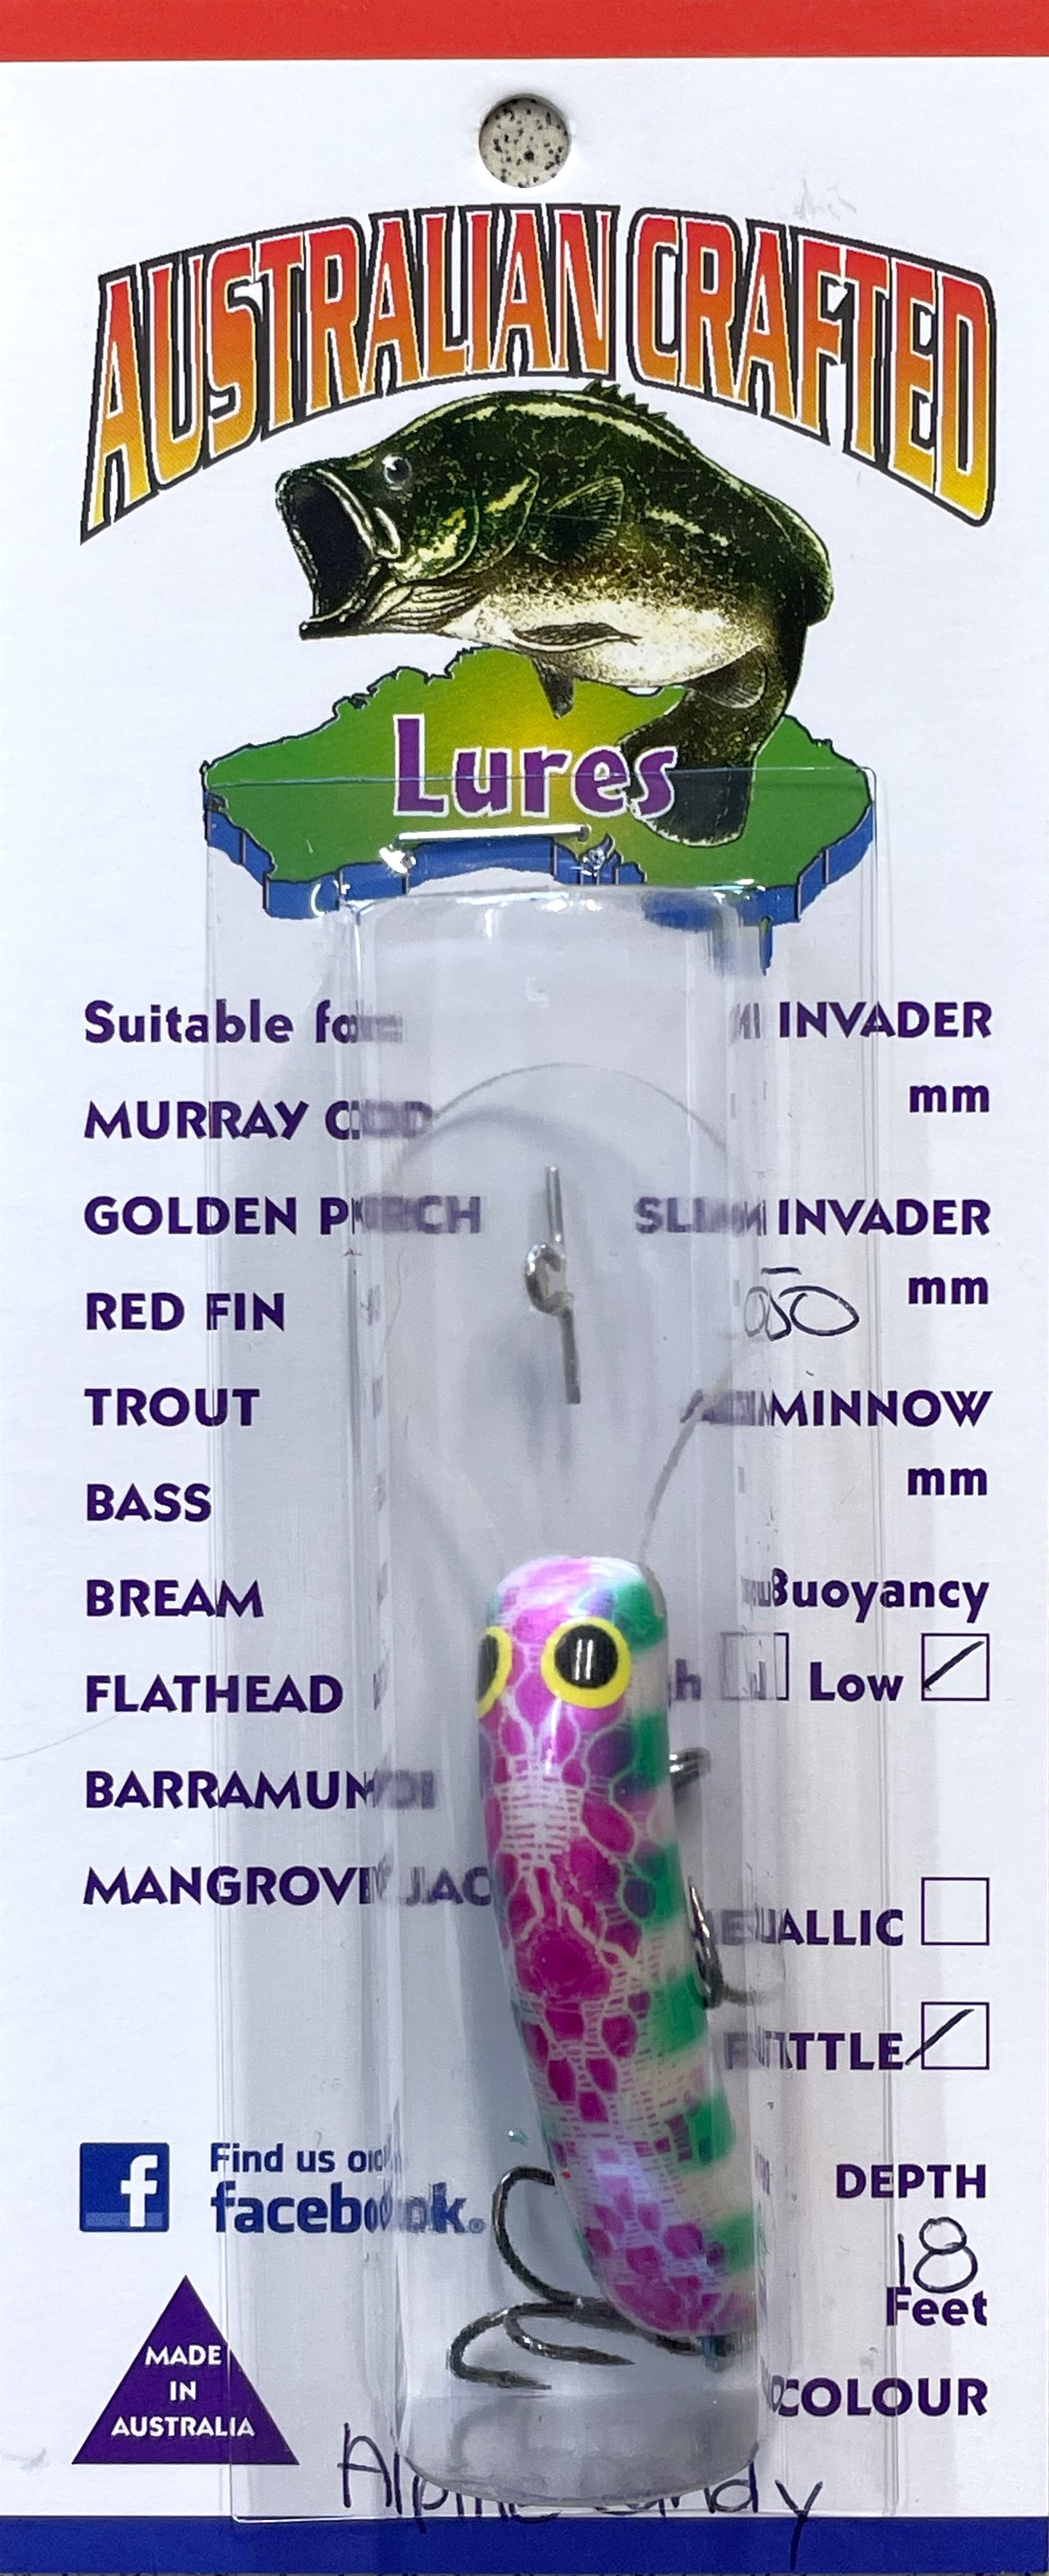 Australian Crafted Lures - Slim Invader 50mm 18ft (Alpine Candy)